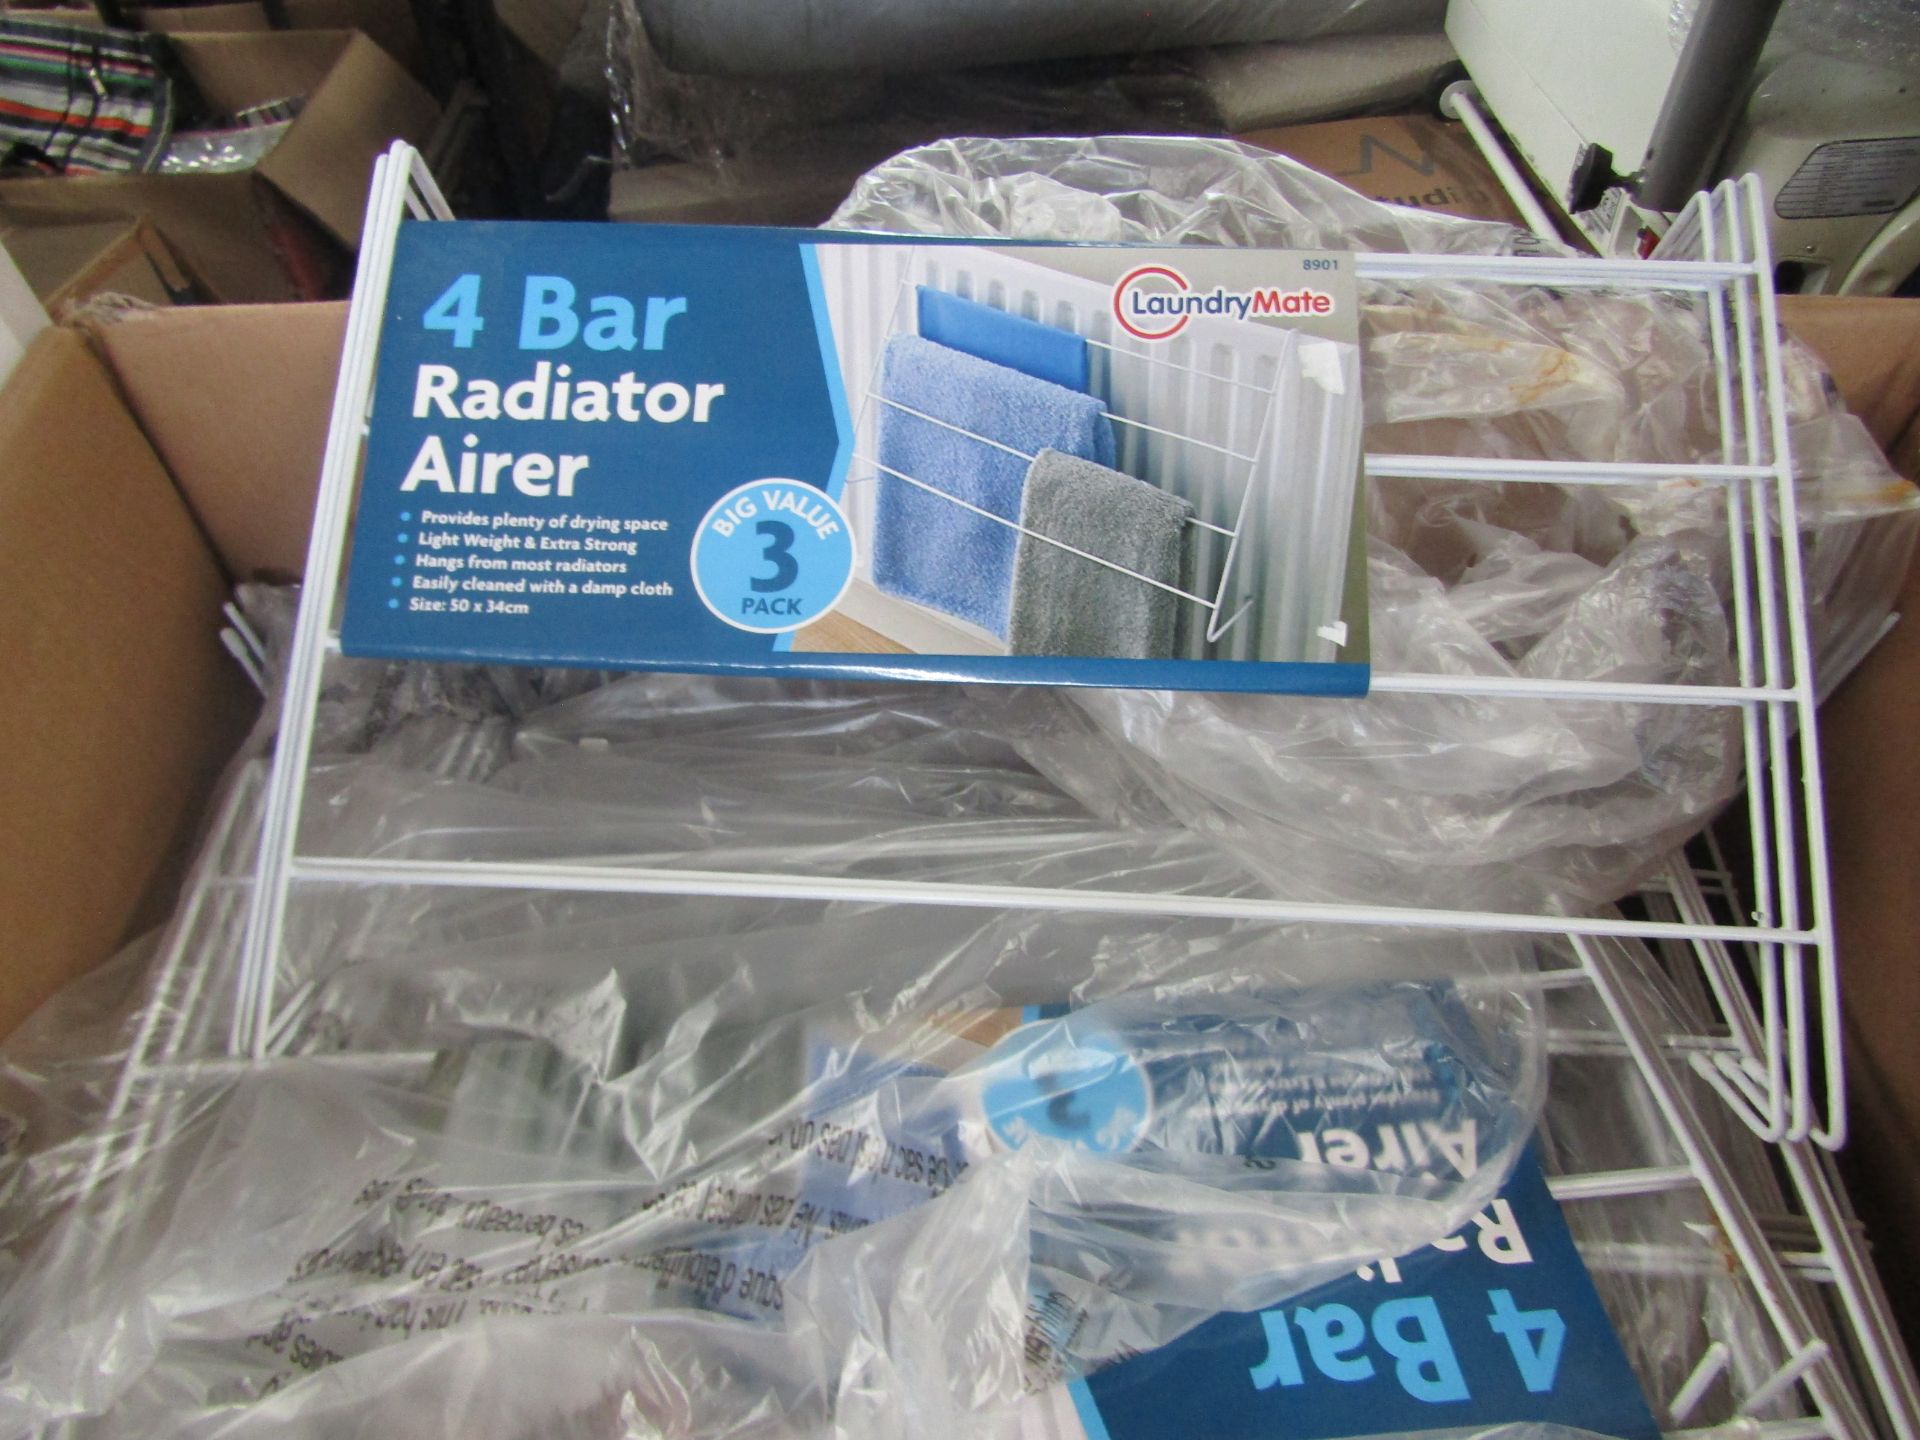 4X LaundryMate - Set of 3 4-Bar Radiator Airers - Good Condition.